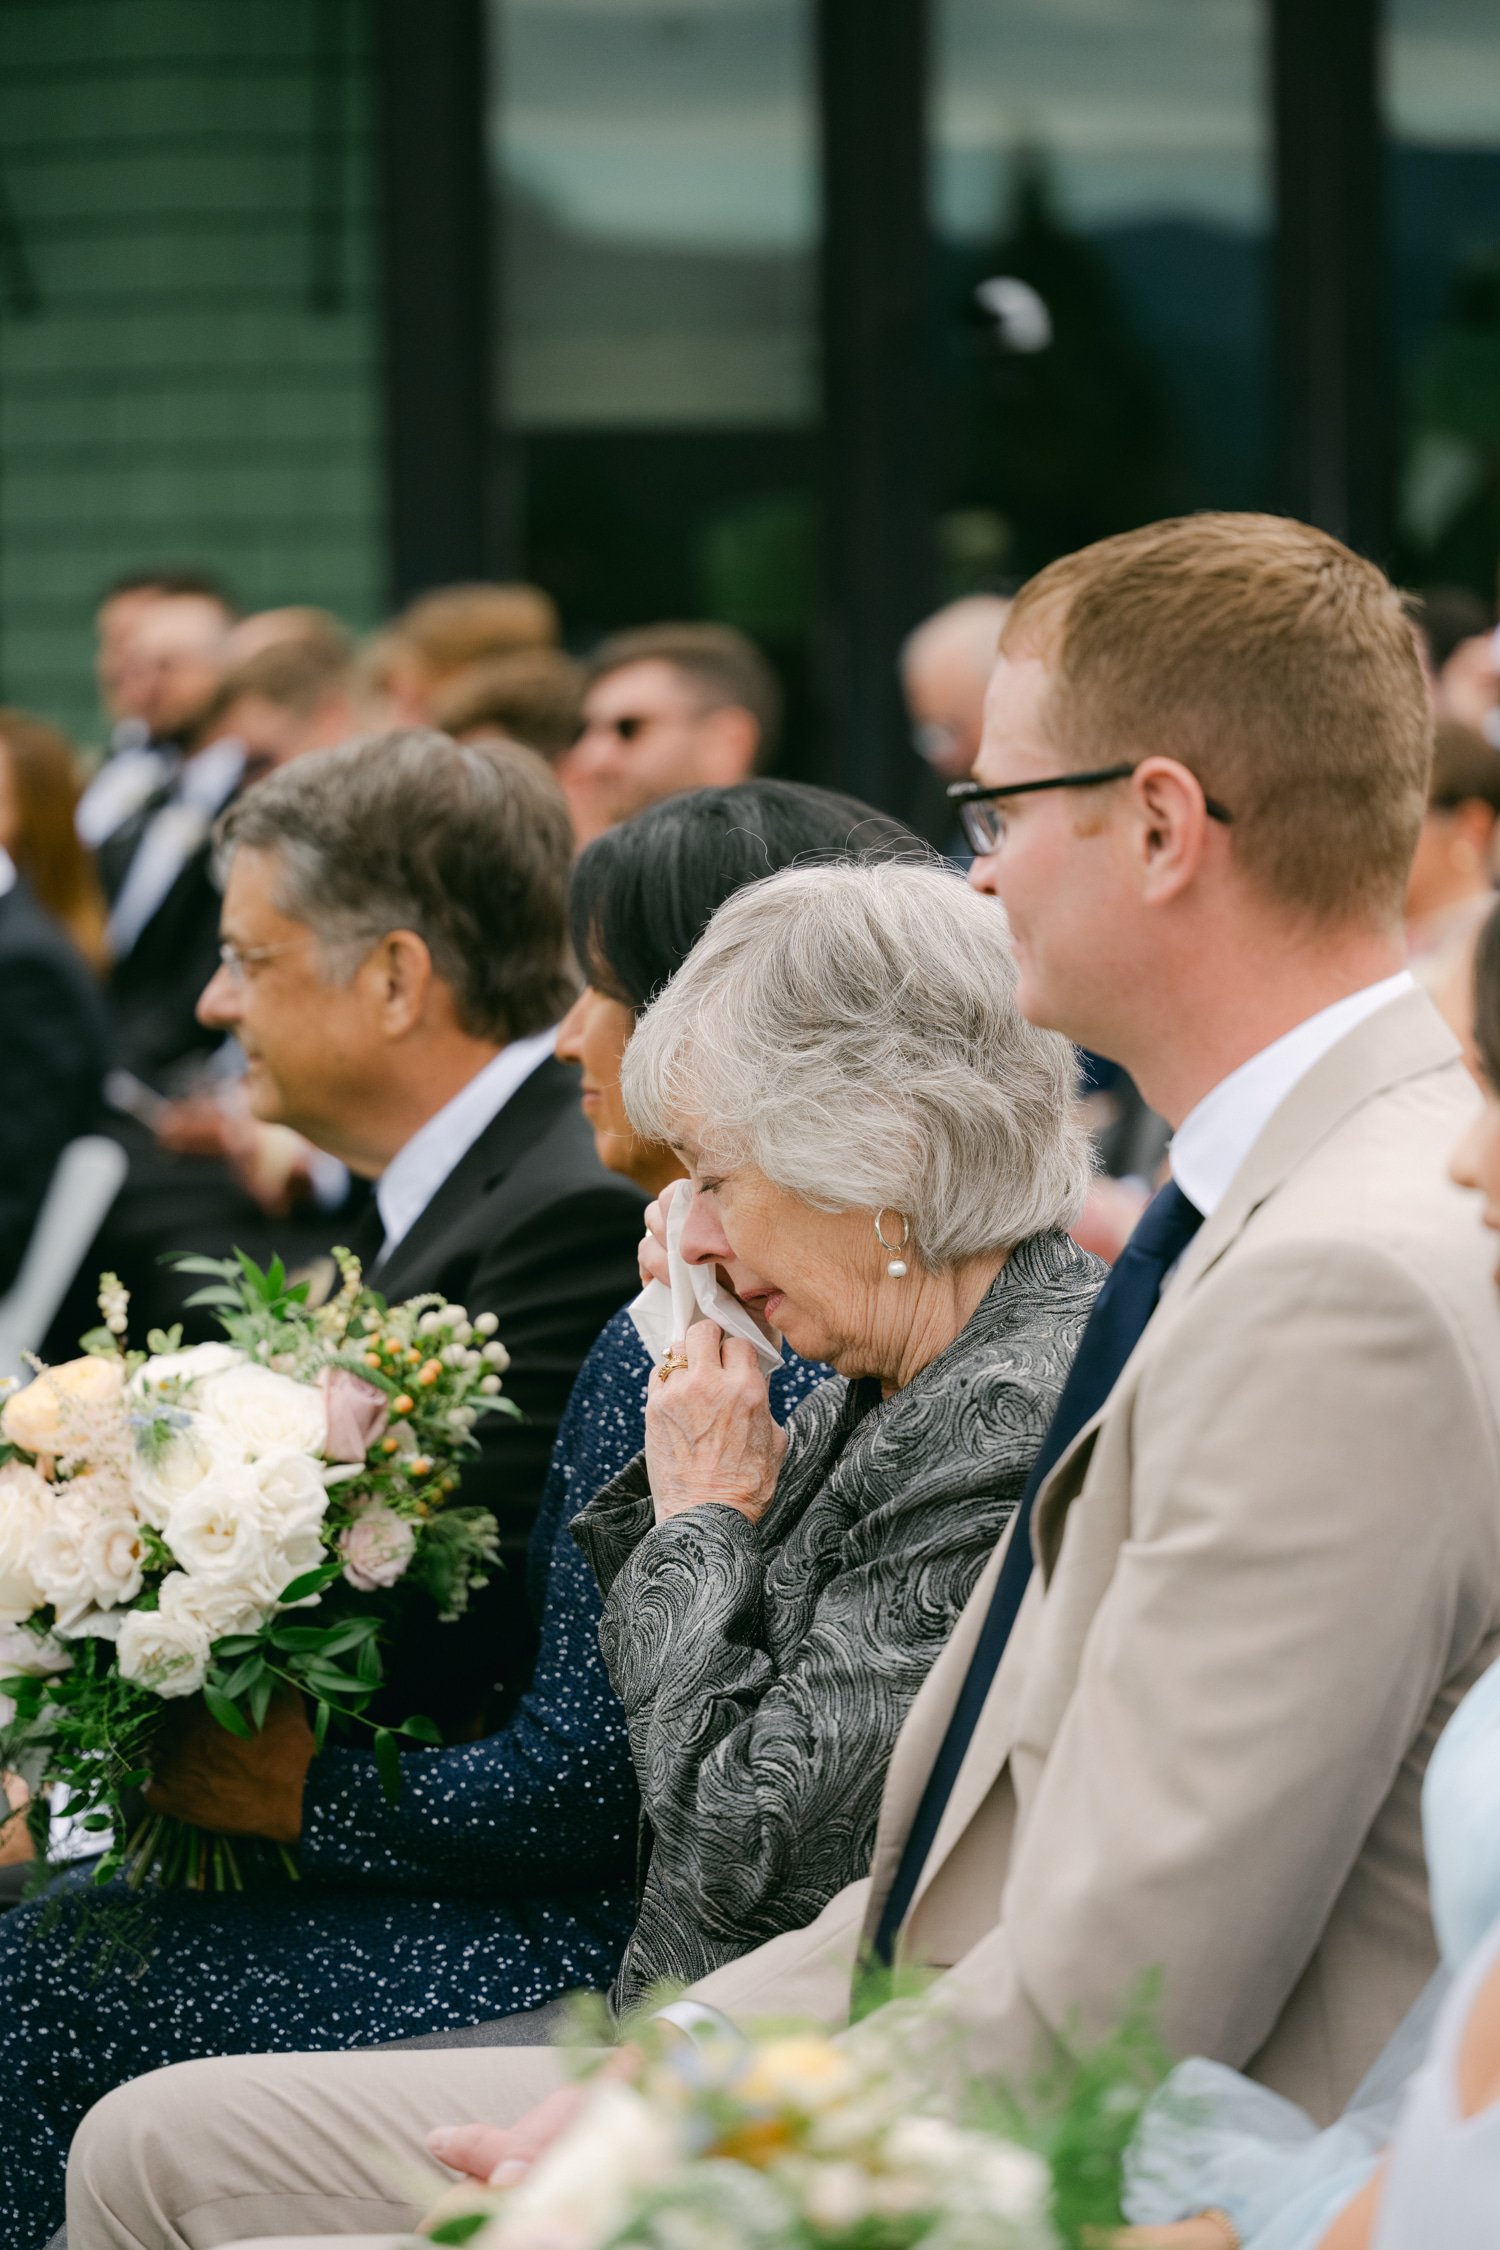 Martis Camp Wedding, photo of a close relative being emotional during the ceremony